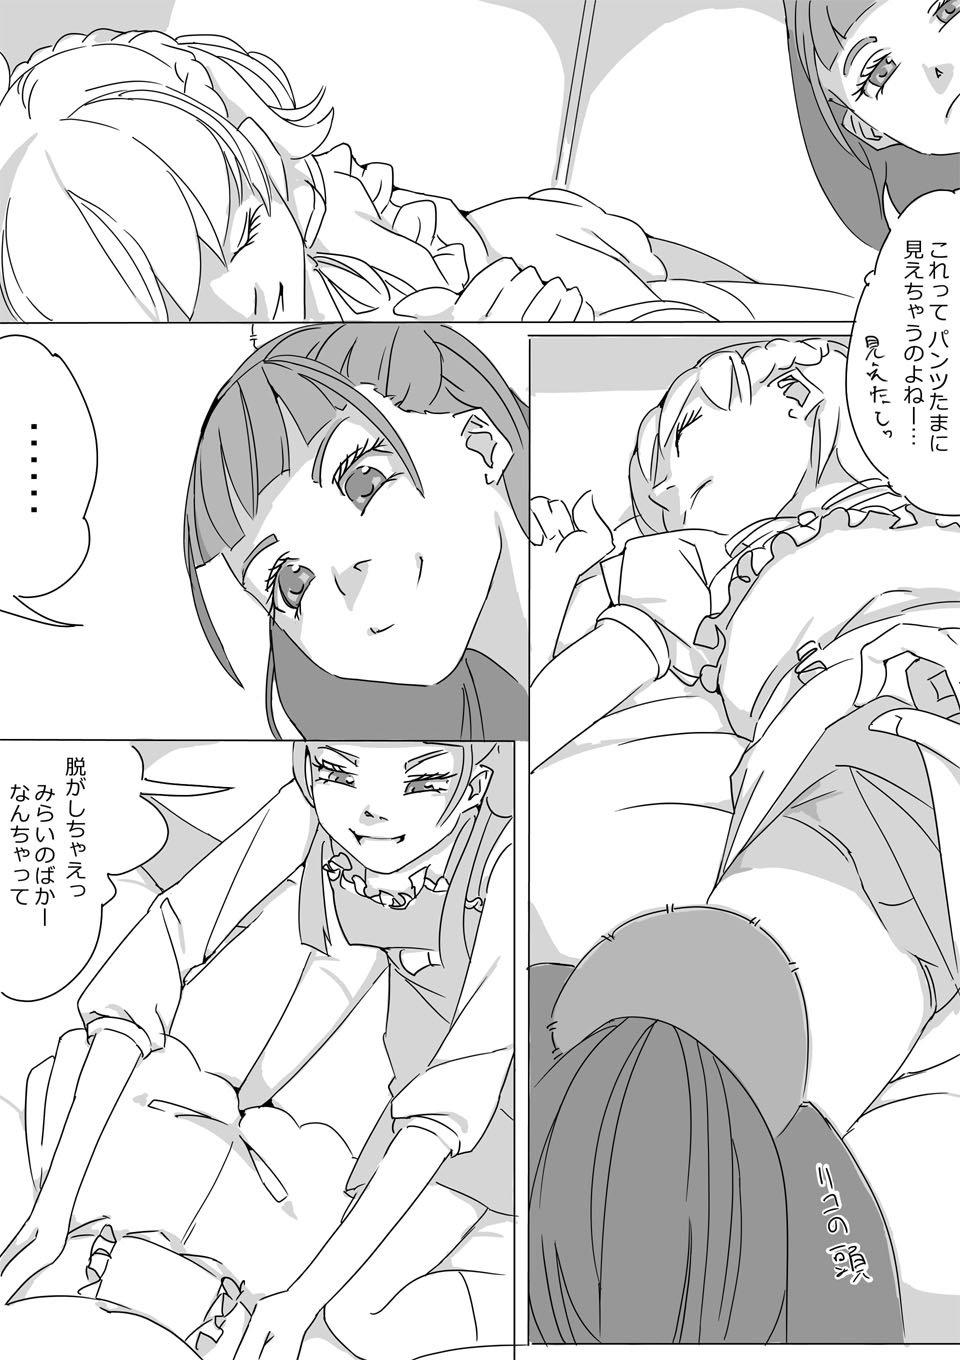 Atm Untitled Precure Doujinshi - Maho girls precure Argentino - Page 3